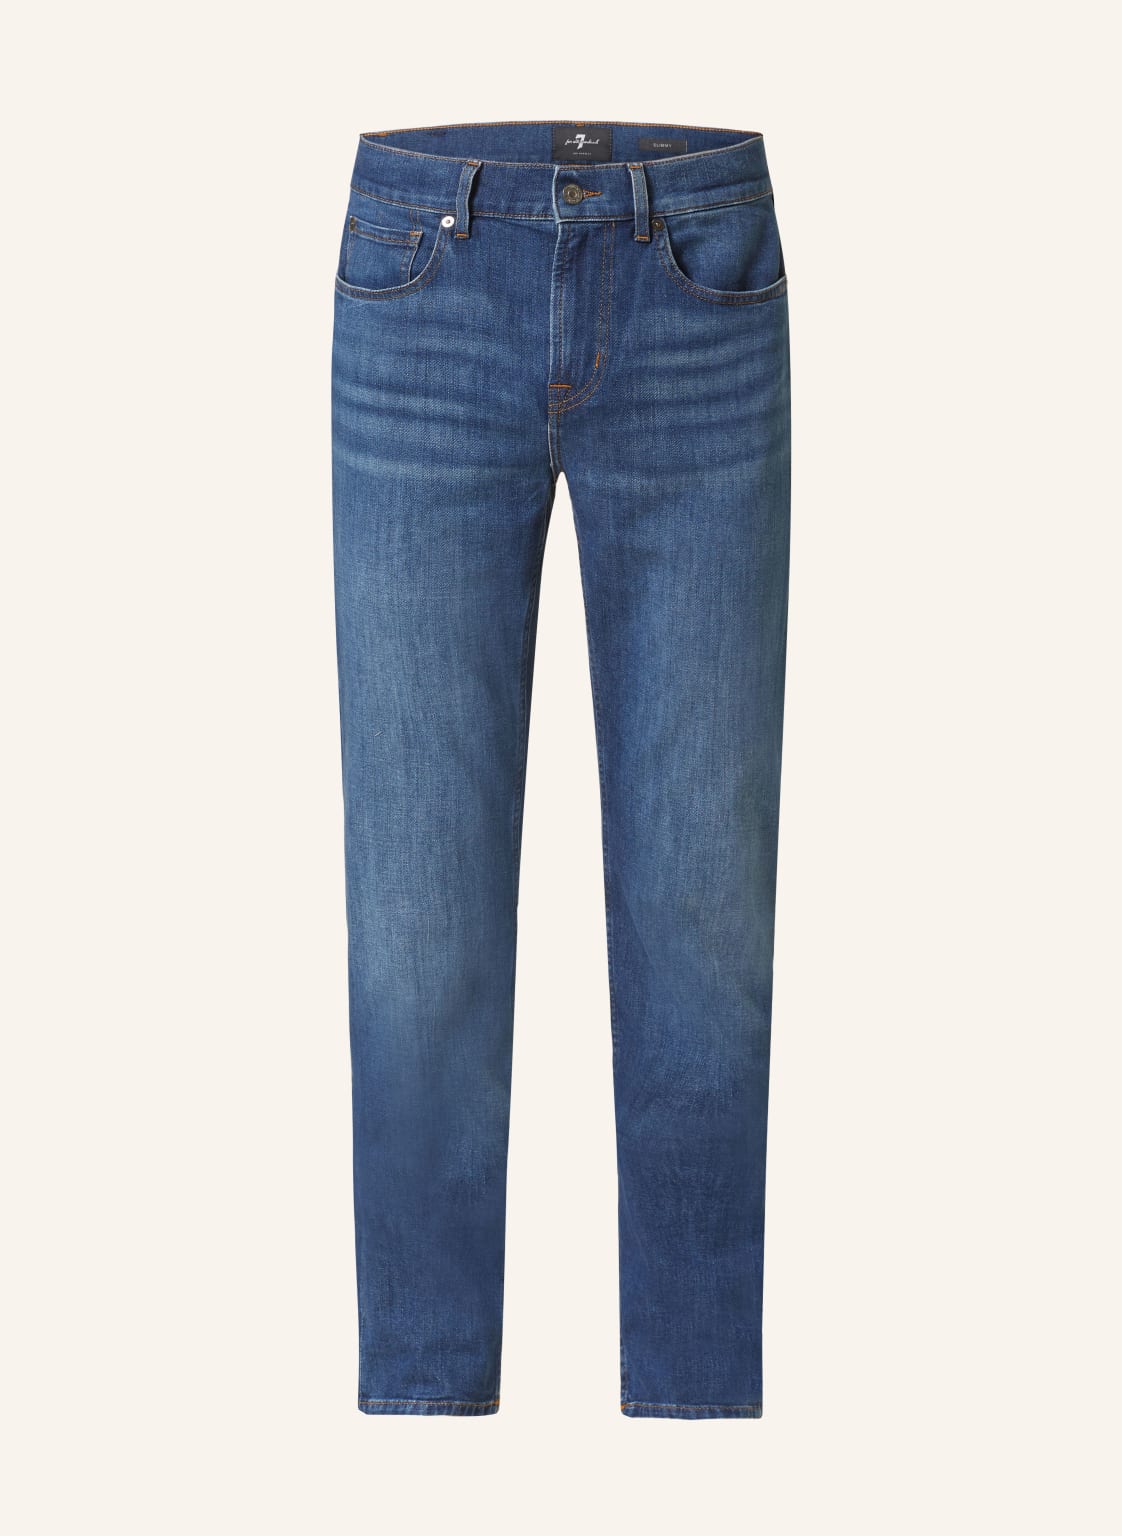 7 For All Mankind Jeans Slimmy Left Slim Fit blau von 7 For All Mankind